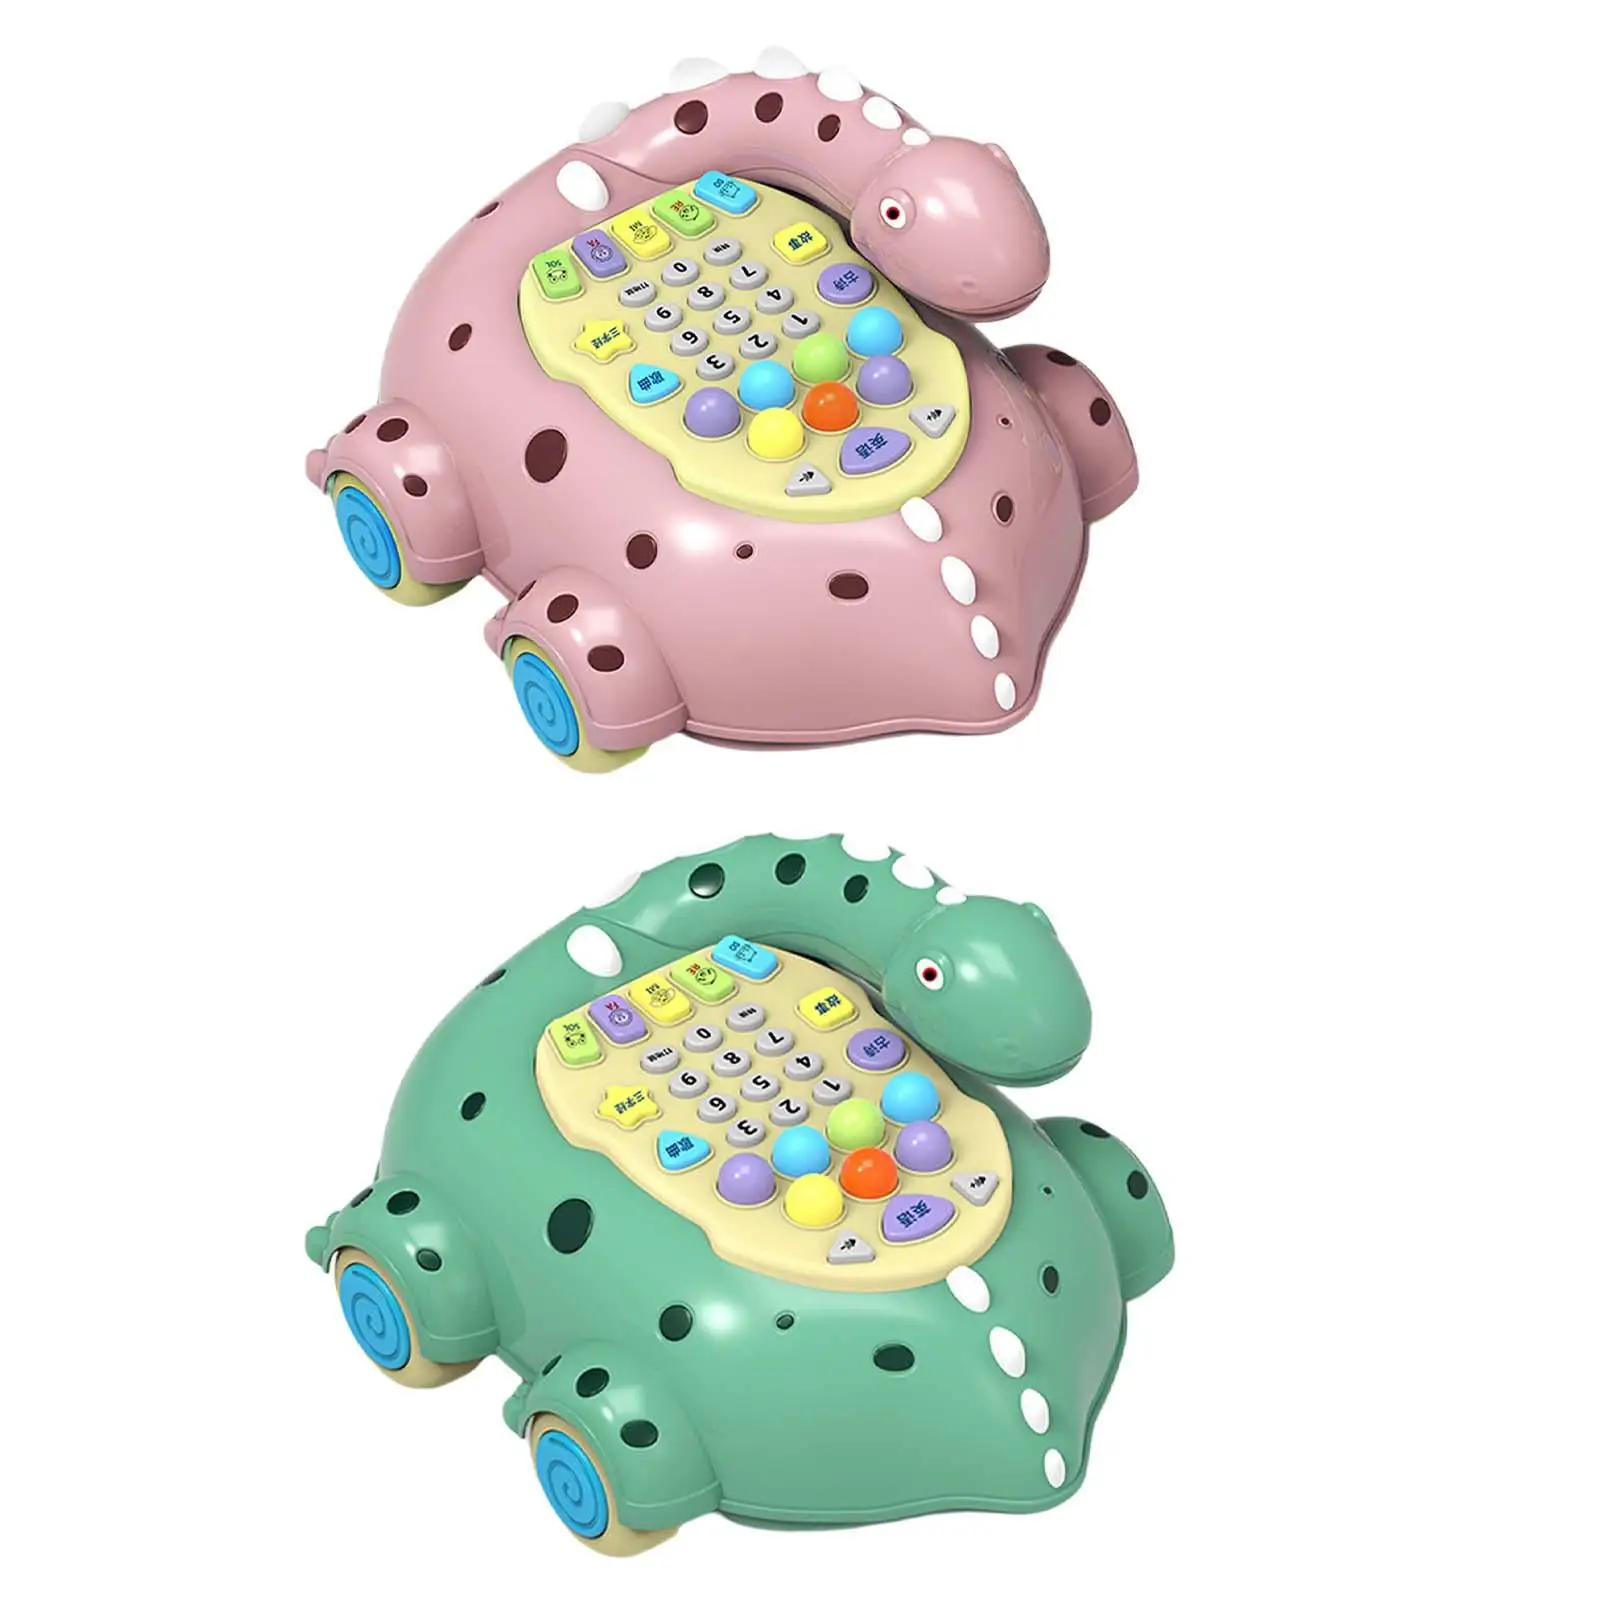 Kids Musical Telephone Toys Car Educational sound Children Phone Toy for Interaction Activity Learning Education Sensory